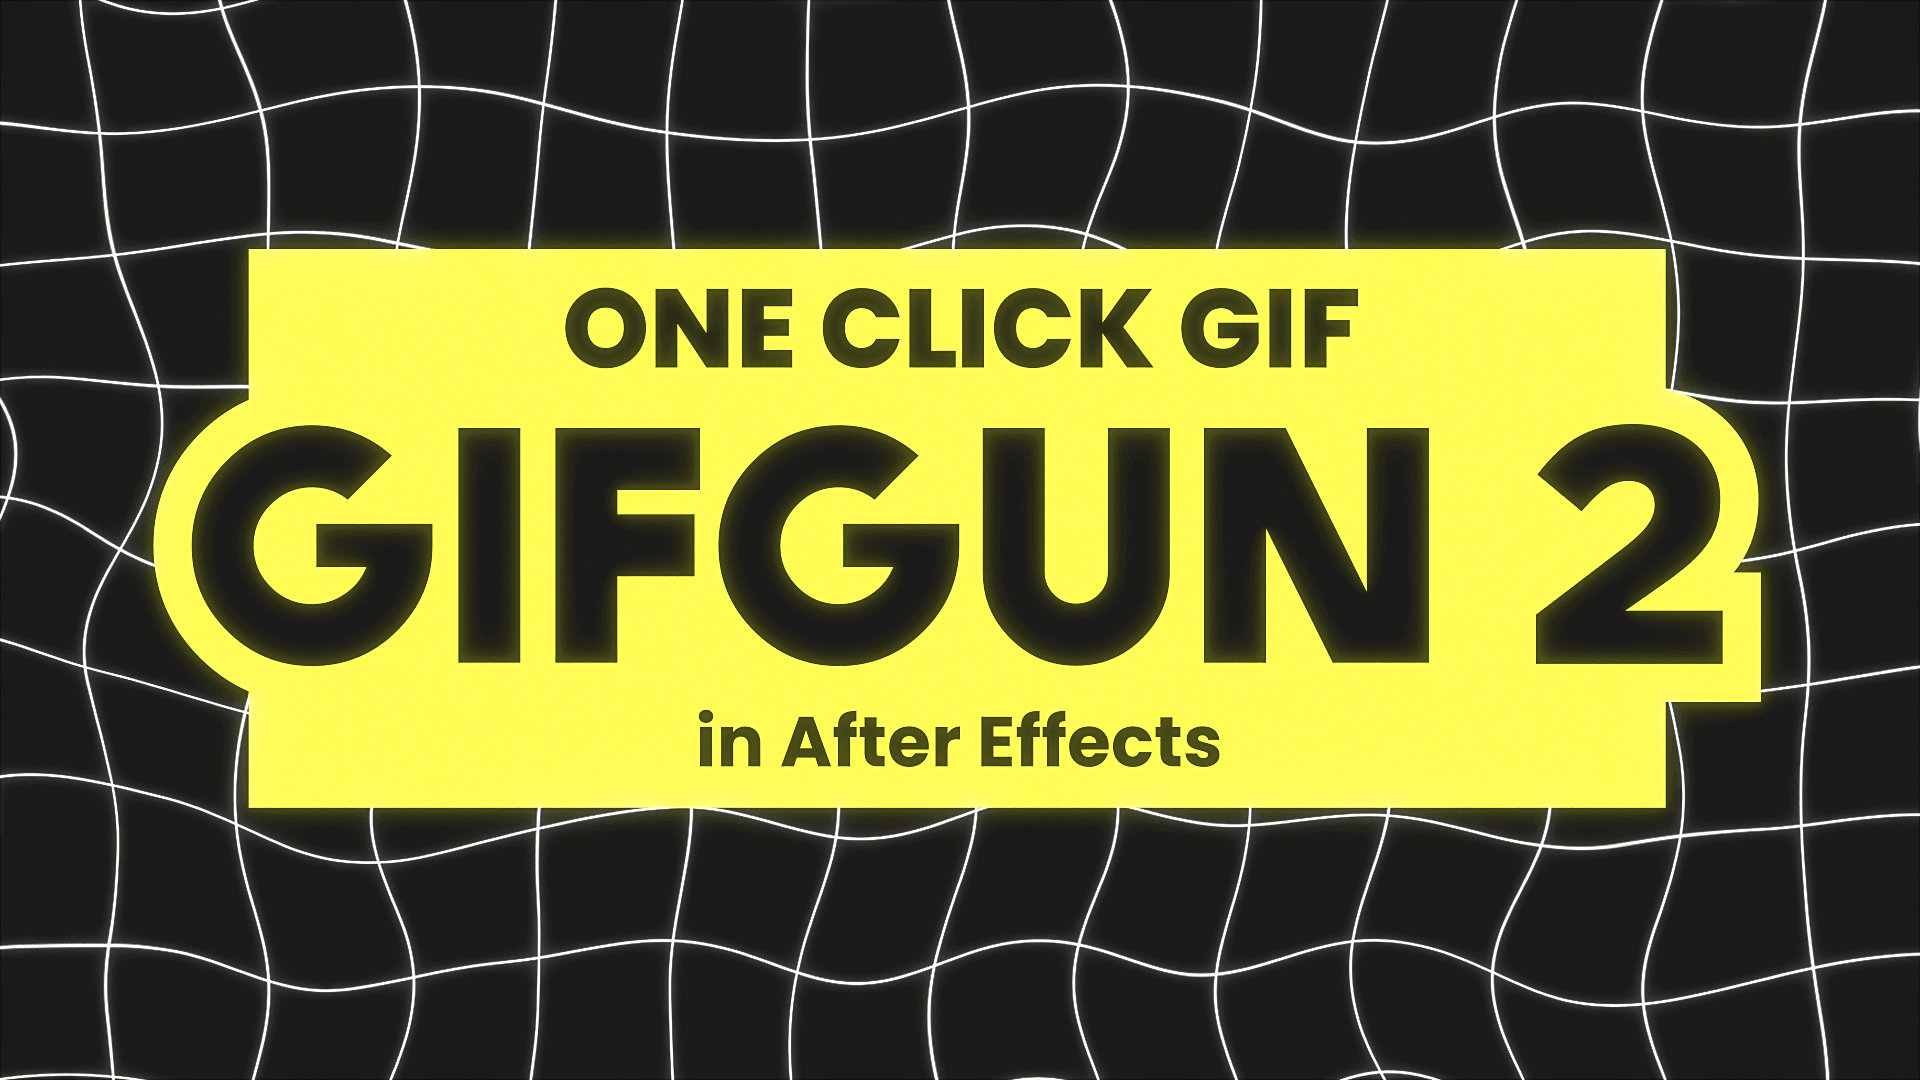 MAKE ANIMATED GIFS WITH TRANSPARENCY FOR TWITCH USING GIFGUN AND AFTER  EFFECTS! 